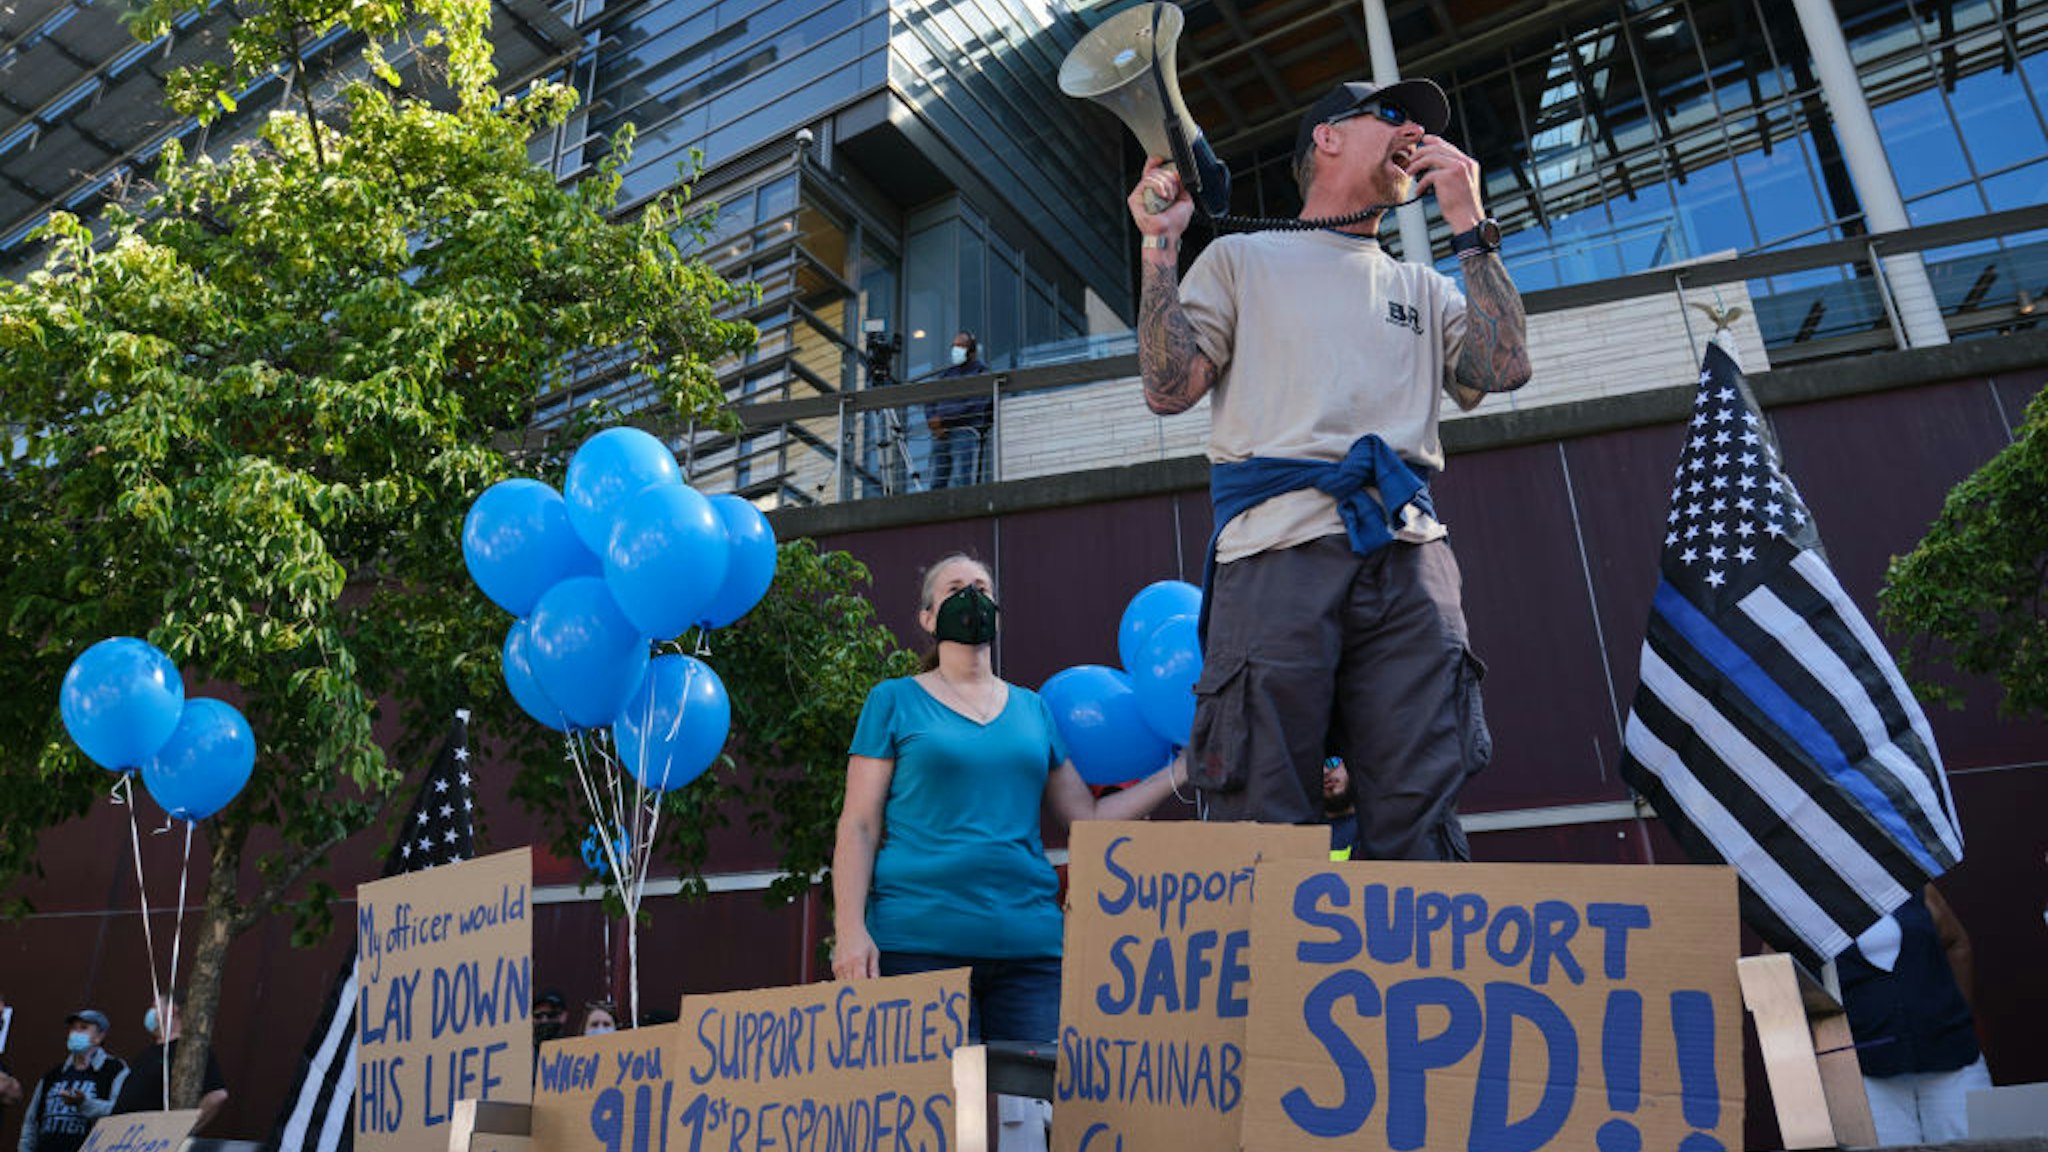 A former law enforement officer leads a chant during a Rally to Support Seattle Police Department rally in front of City Hall on July 15, 2020 in Seattle, Washington.